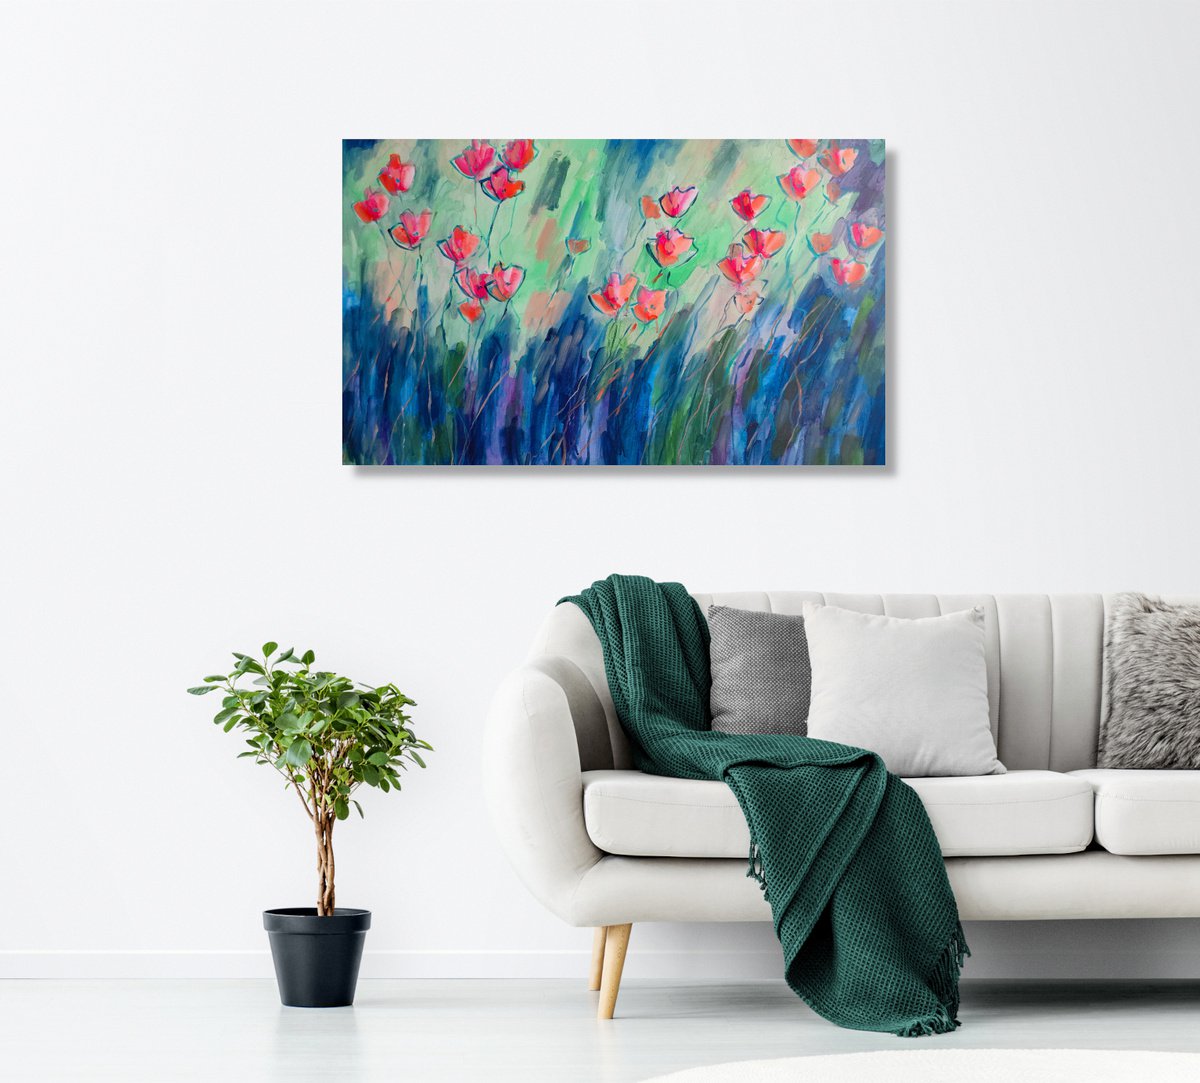 Floral Fantasy #02 - Semi-Abstract Flowers - Unframed Painting by Marina Krylova